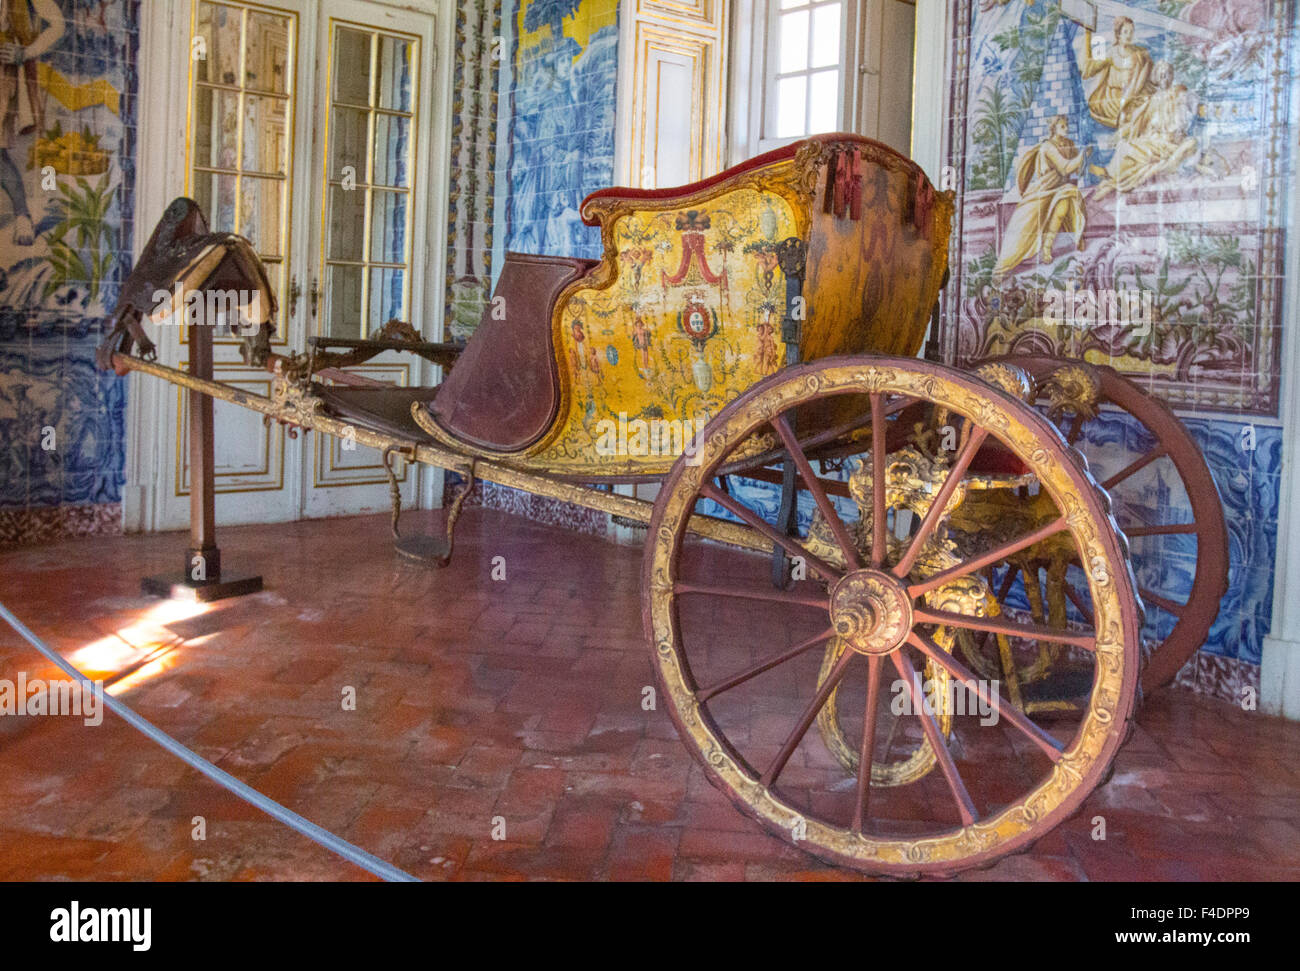 A shot of the royal carriage of King Dom Pedro de Braganza with the saddle used on the horse that pulled the carriage. Stock Photo